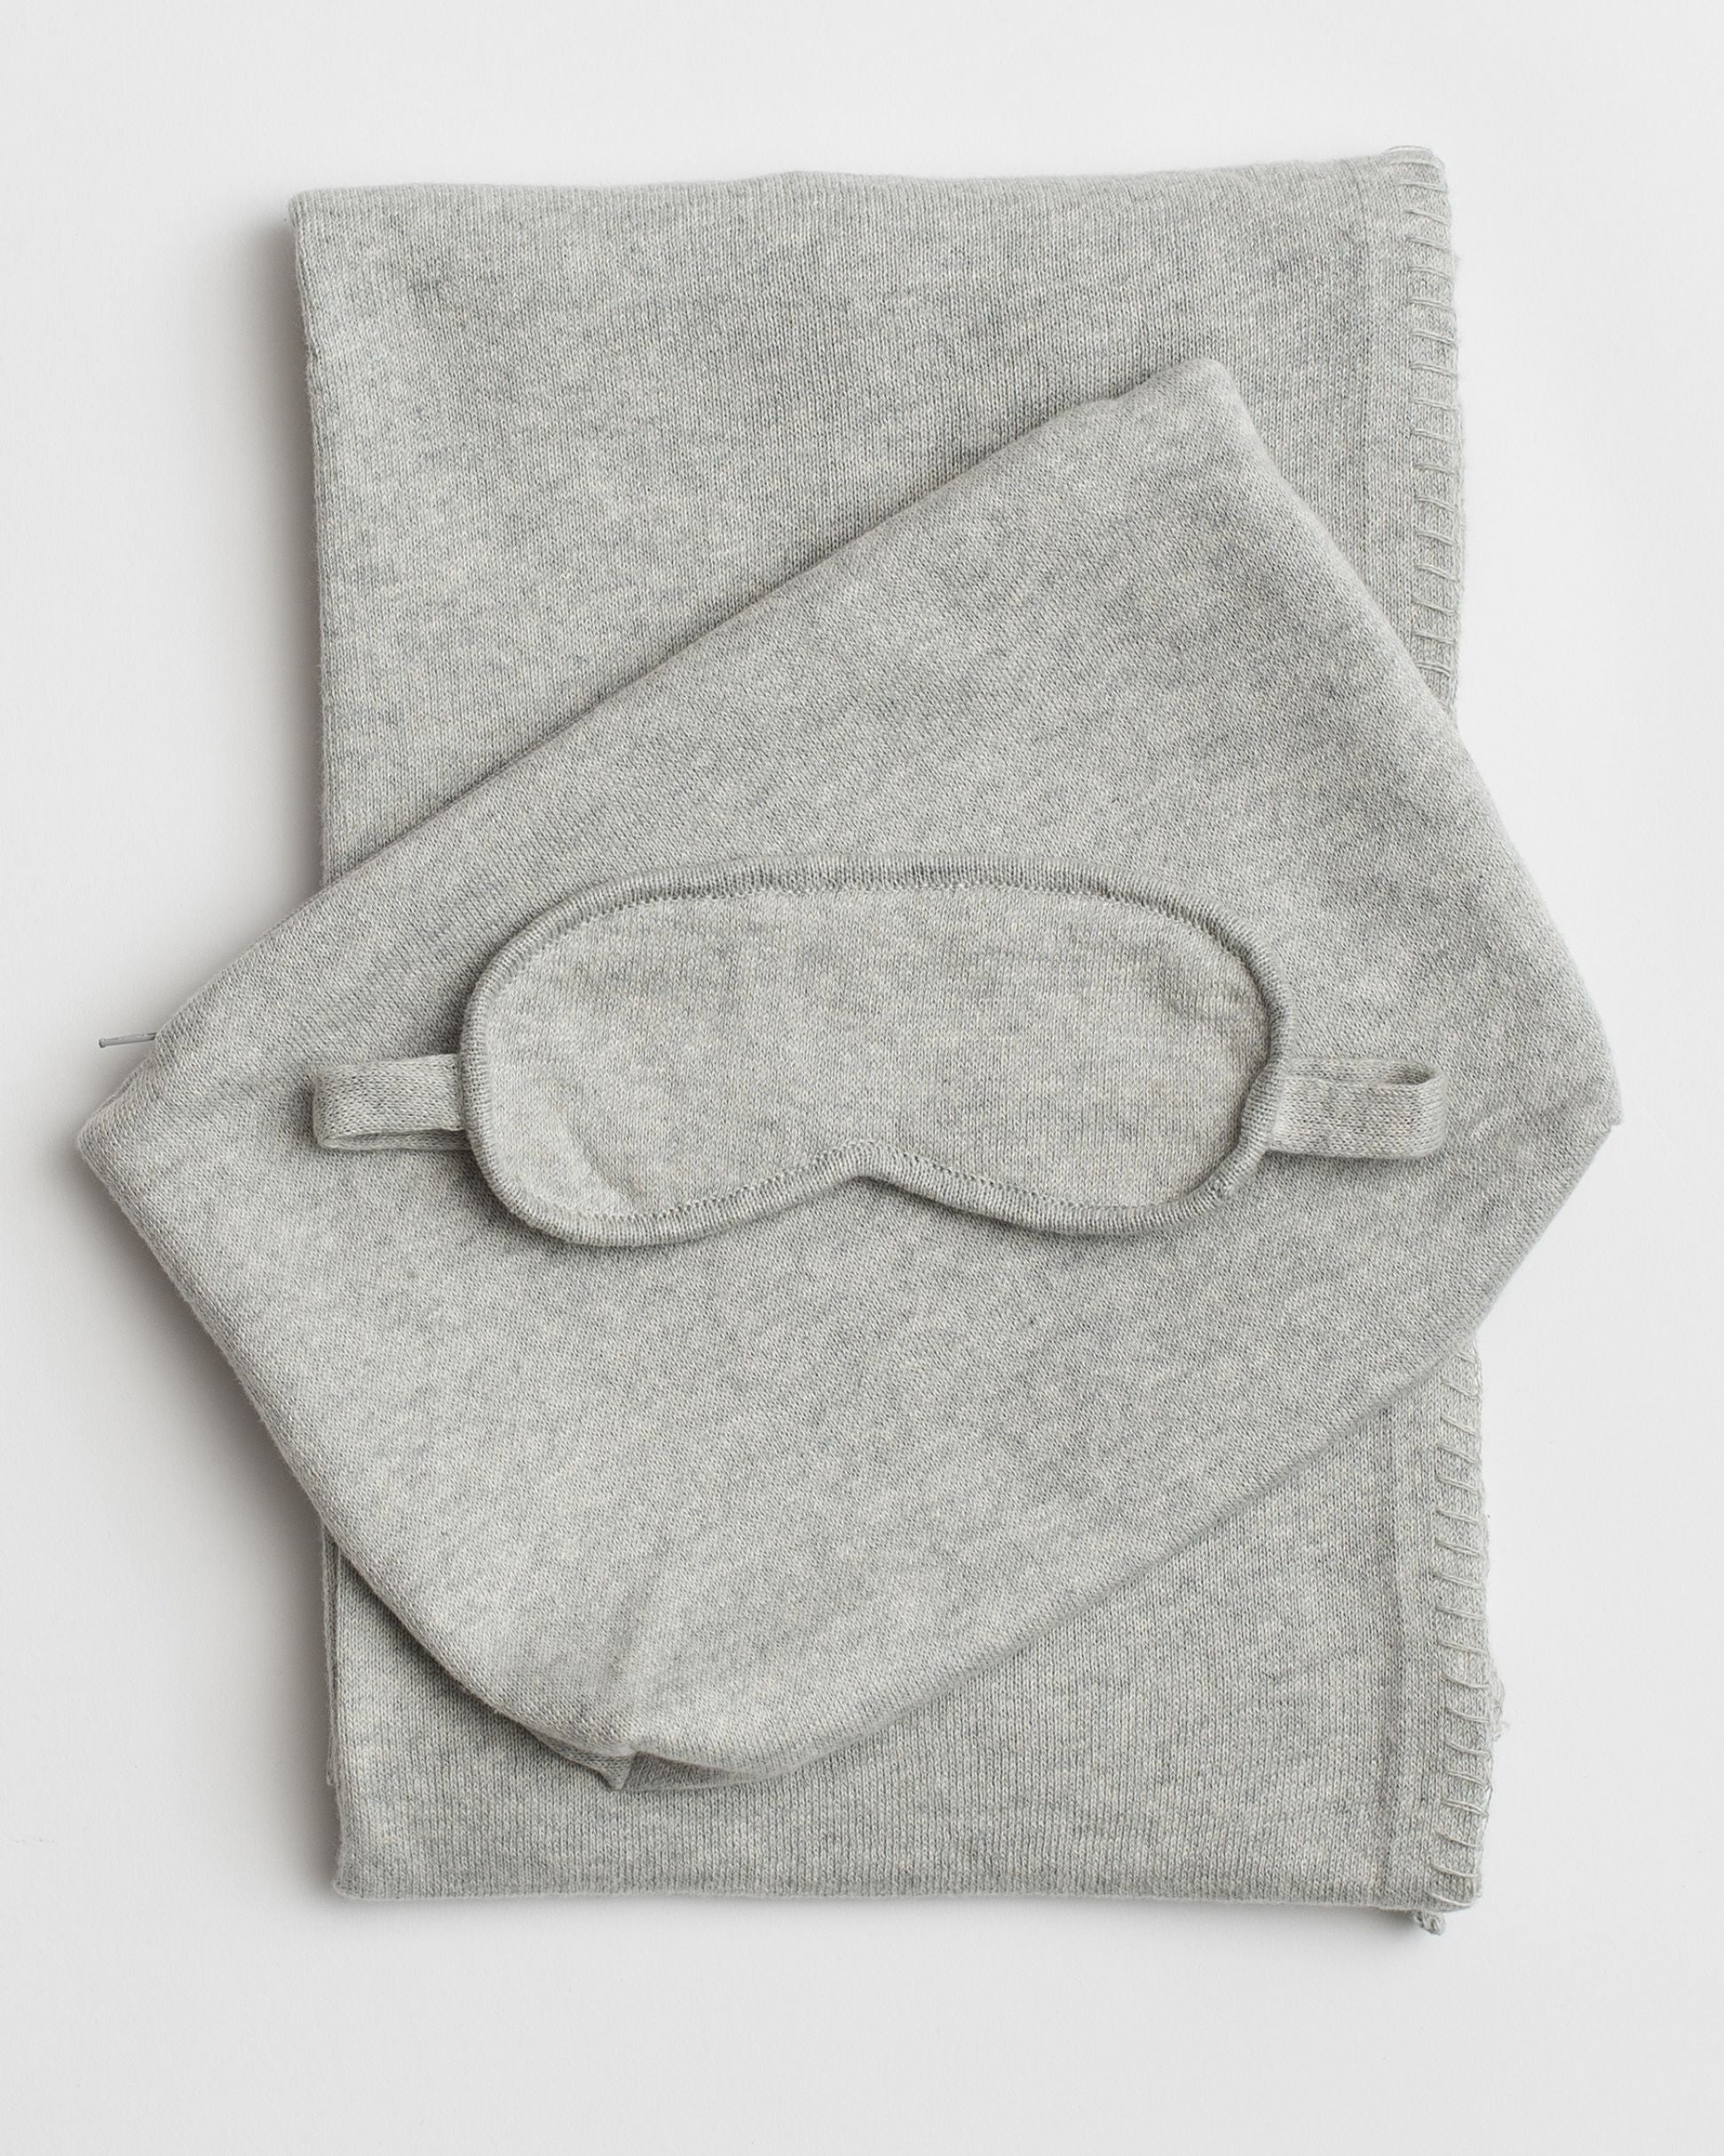 Light Gray Travel Set shown with blanket,  carry pouch and eye mask